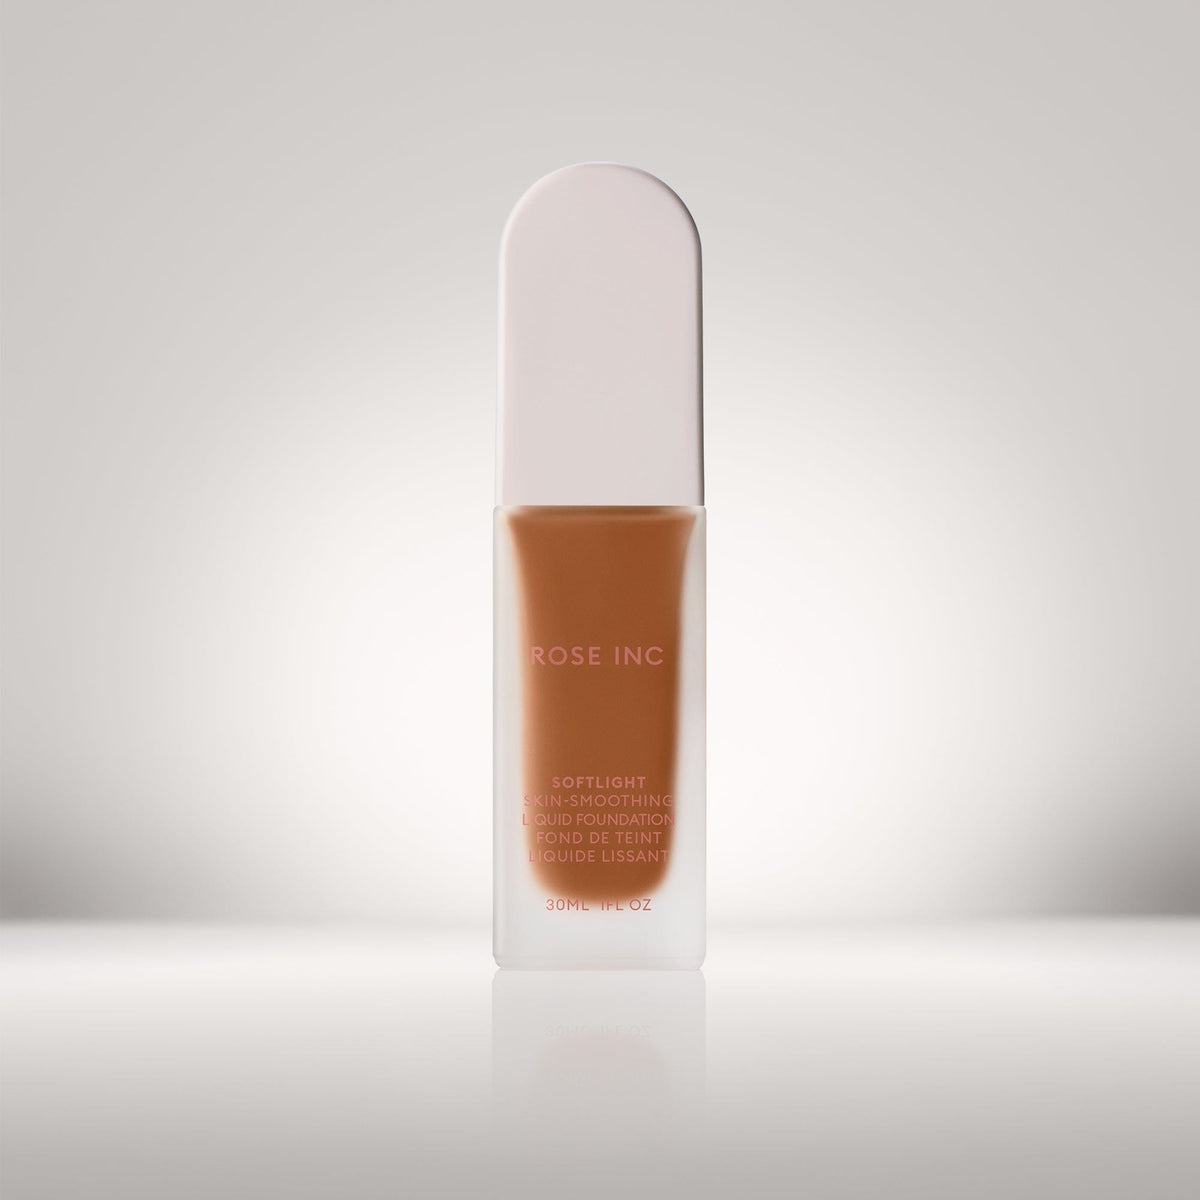 Soldier image of shade 27C in Softlight Smoothing Foundation